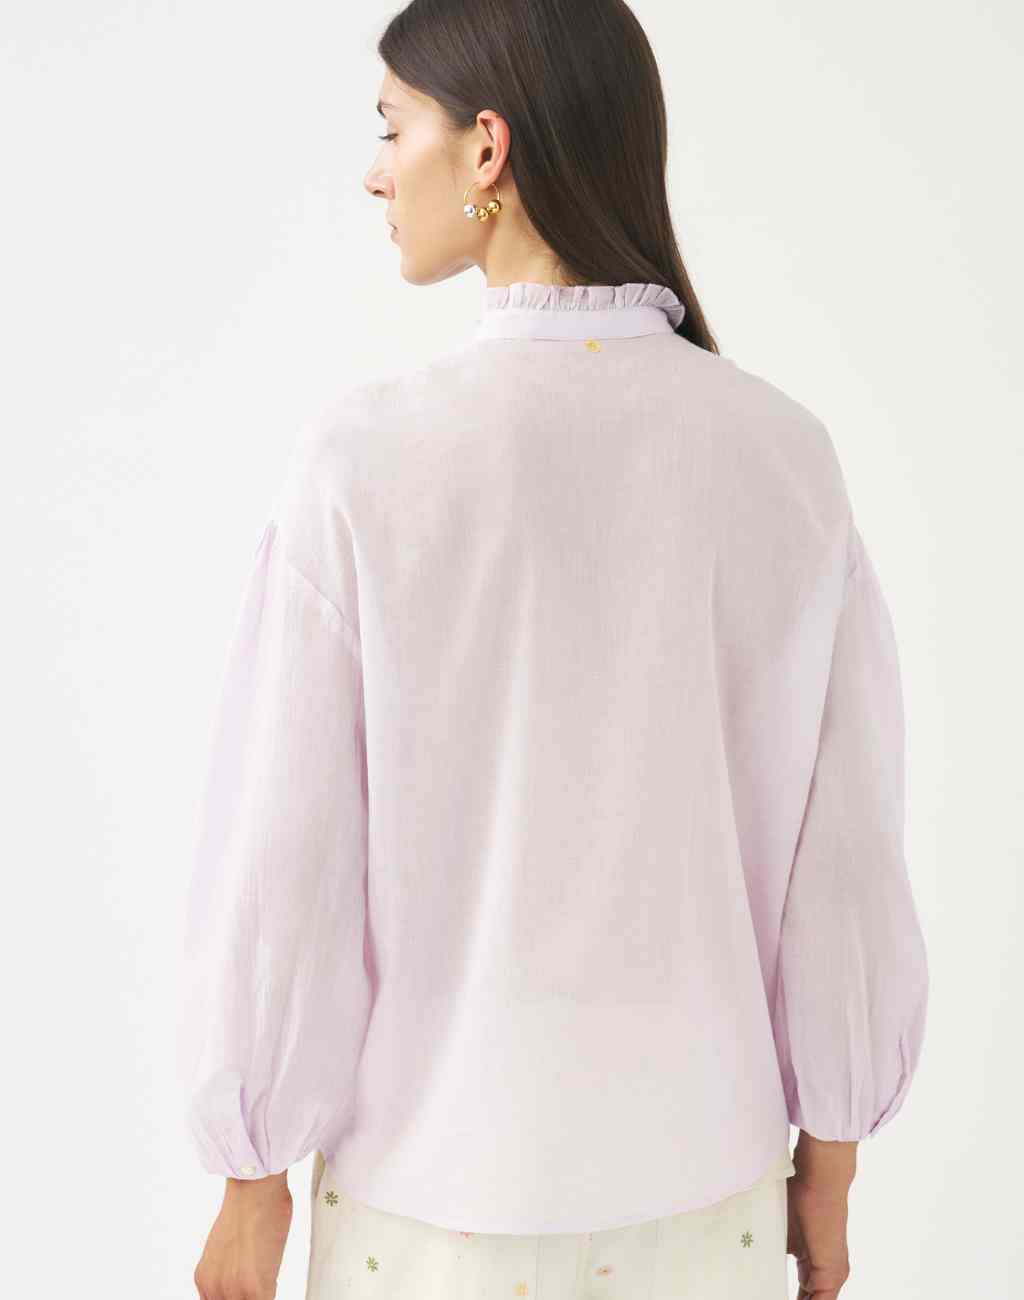 Cotton Voile Lightweight Anna Blouse in Lilac with Shoulder Pleats, Ruffled Collar, and Balloon Sleeves